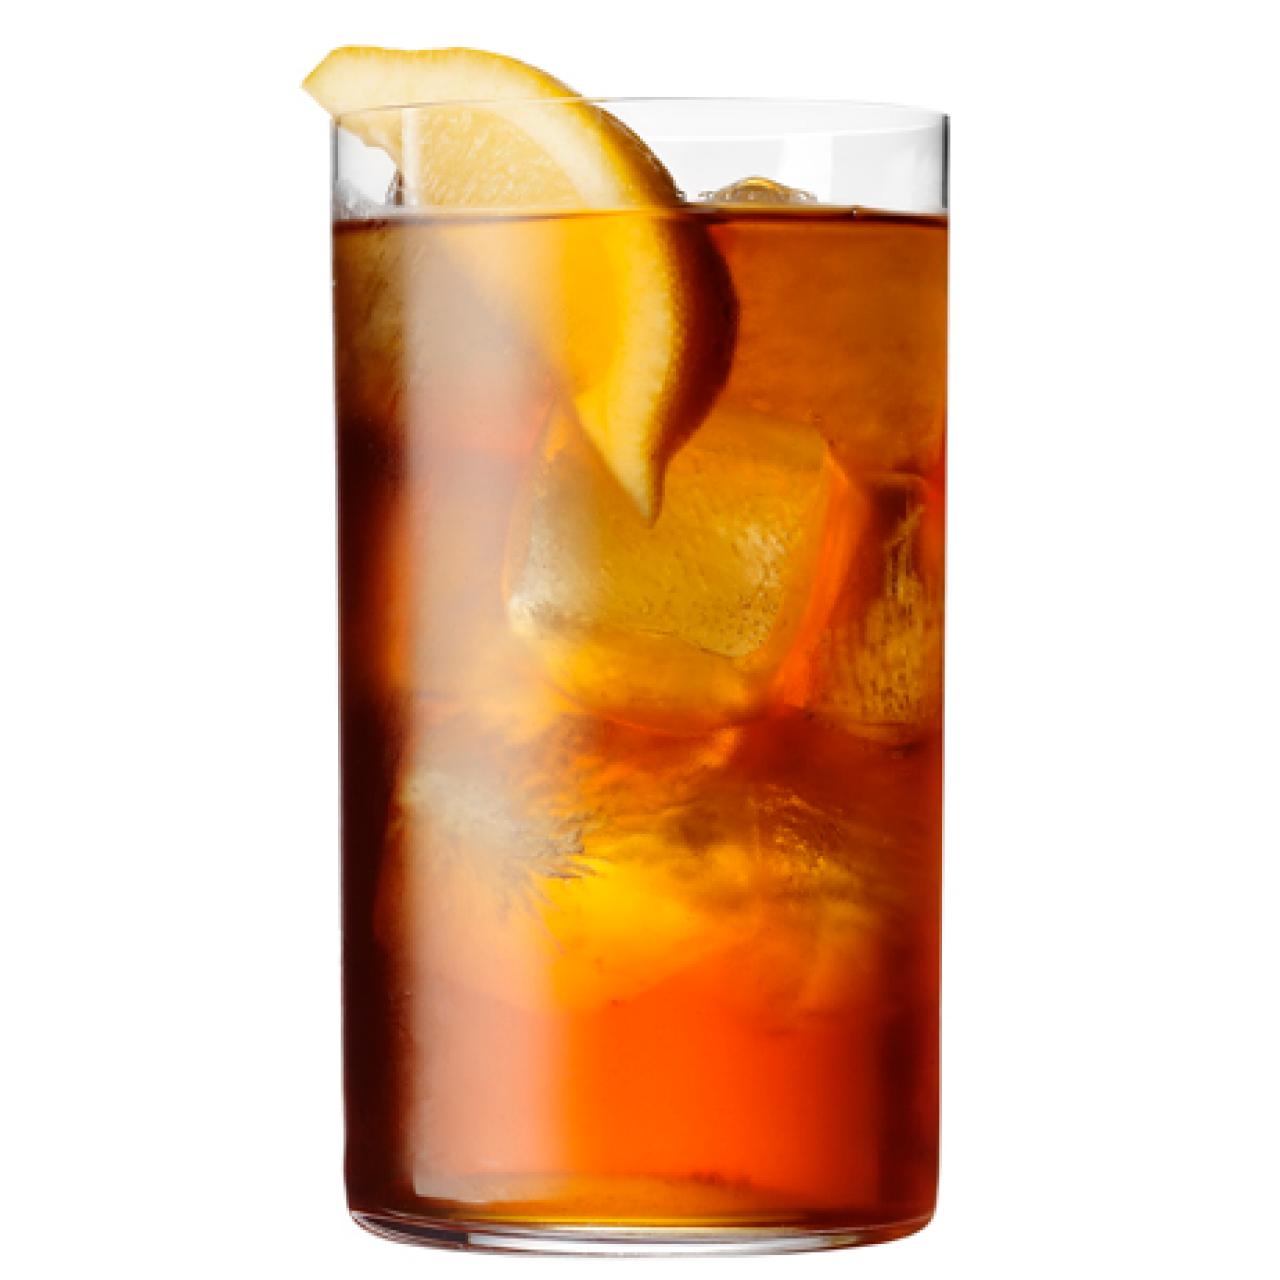 Share how you do your iced tea. For me, I just brew the tea well